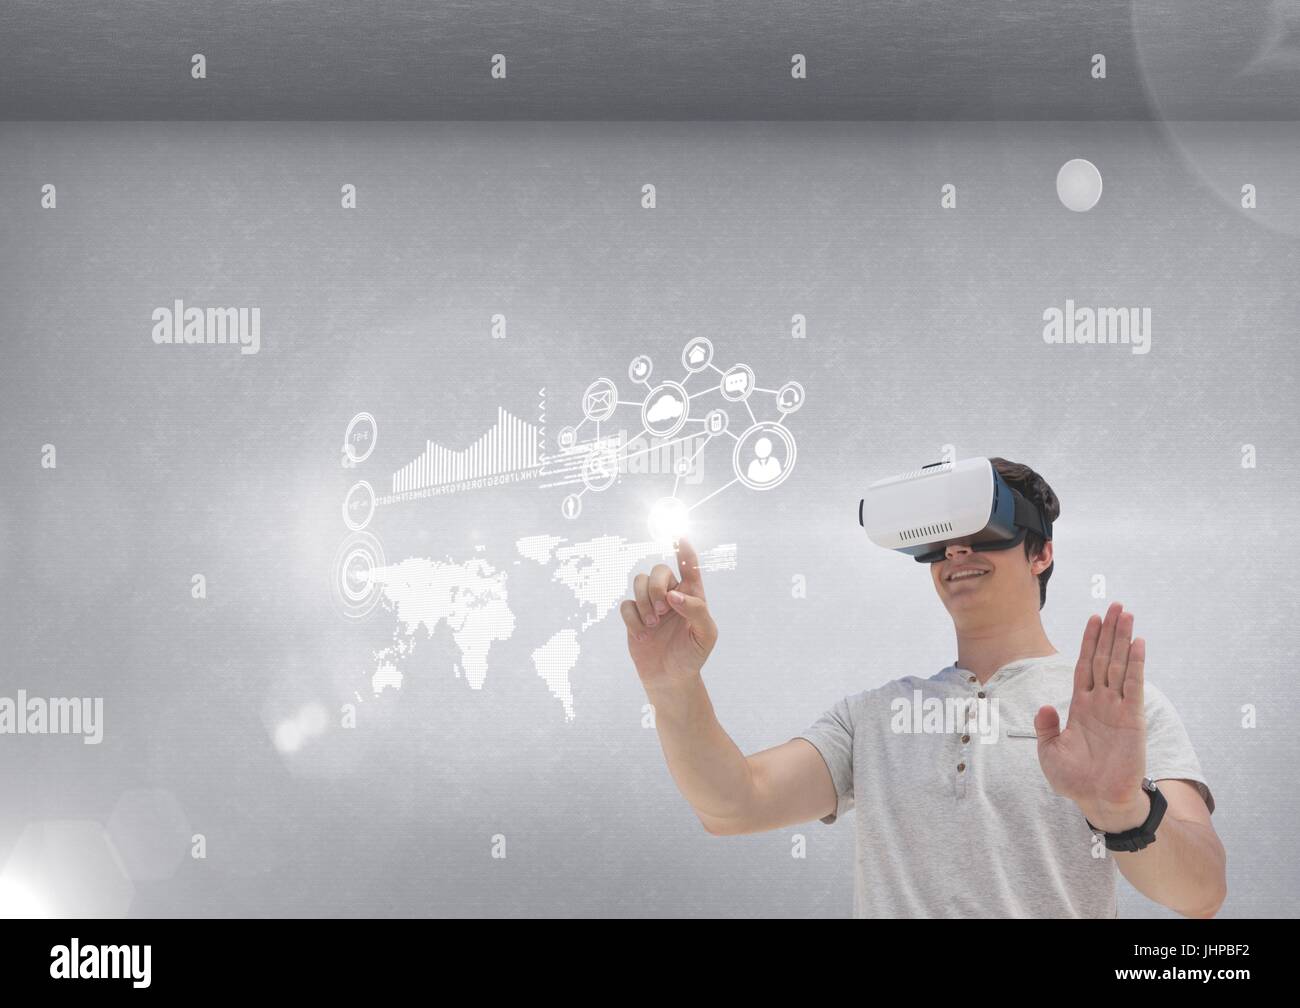 Digital composite of Happy man in VR headset touching interface against grey background with flares Stock Photo